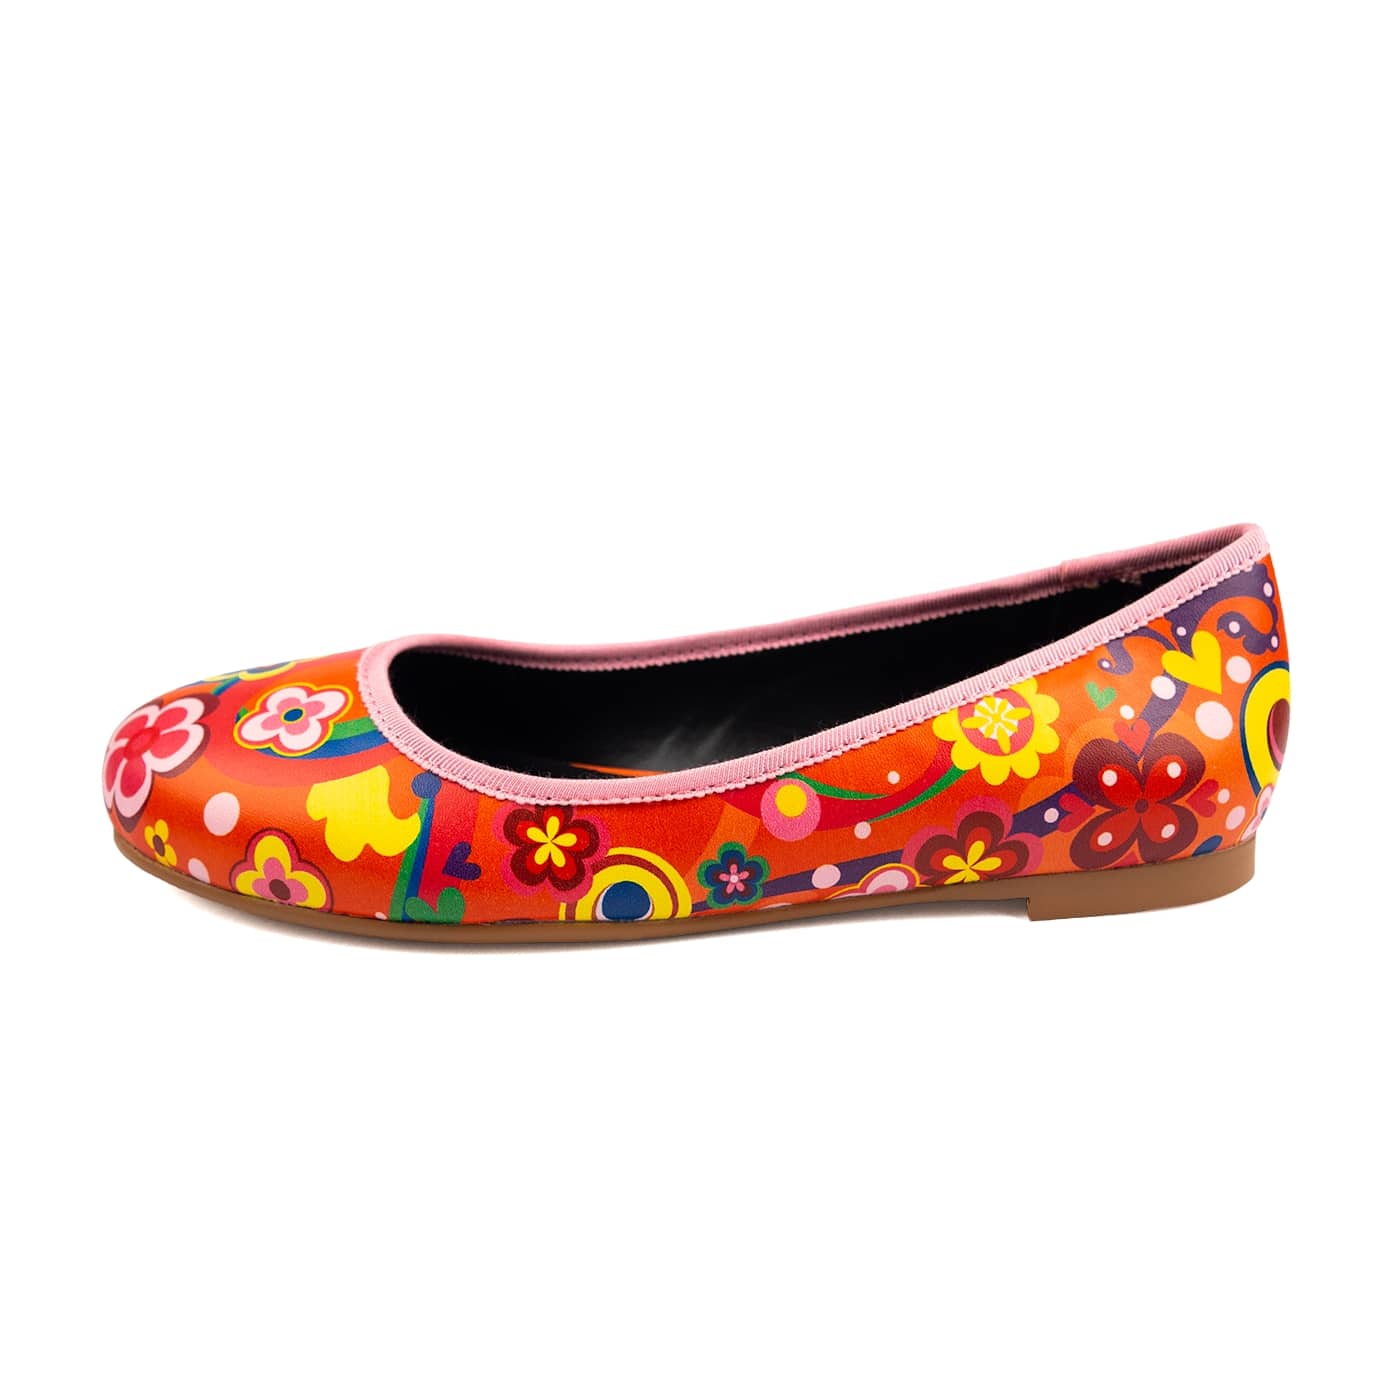 Groovy Remix Ballet Flats by RainbowsAndFairies.com (Woodstock - Flower Power - Psychedelic Hippy - Mismatched Shoes - Quirky Shoes - Slip Ones - Comfy Flats - Cute Shoes) - SKU: FW_BALET_GROOV_REM - Pic 03